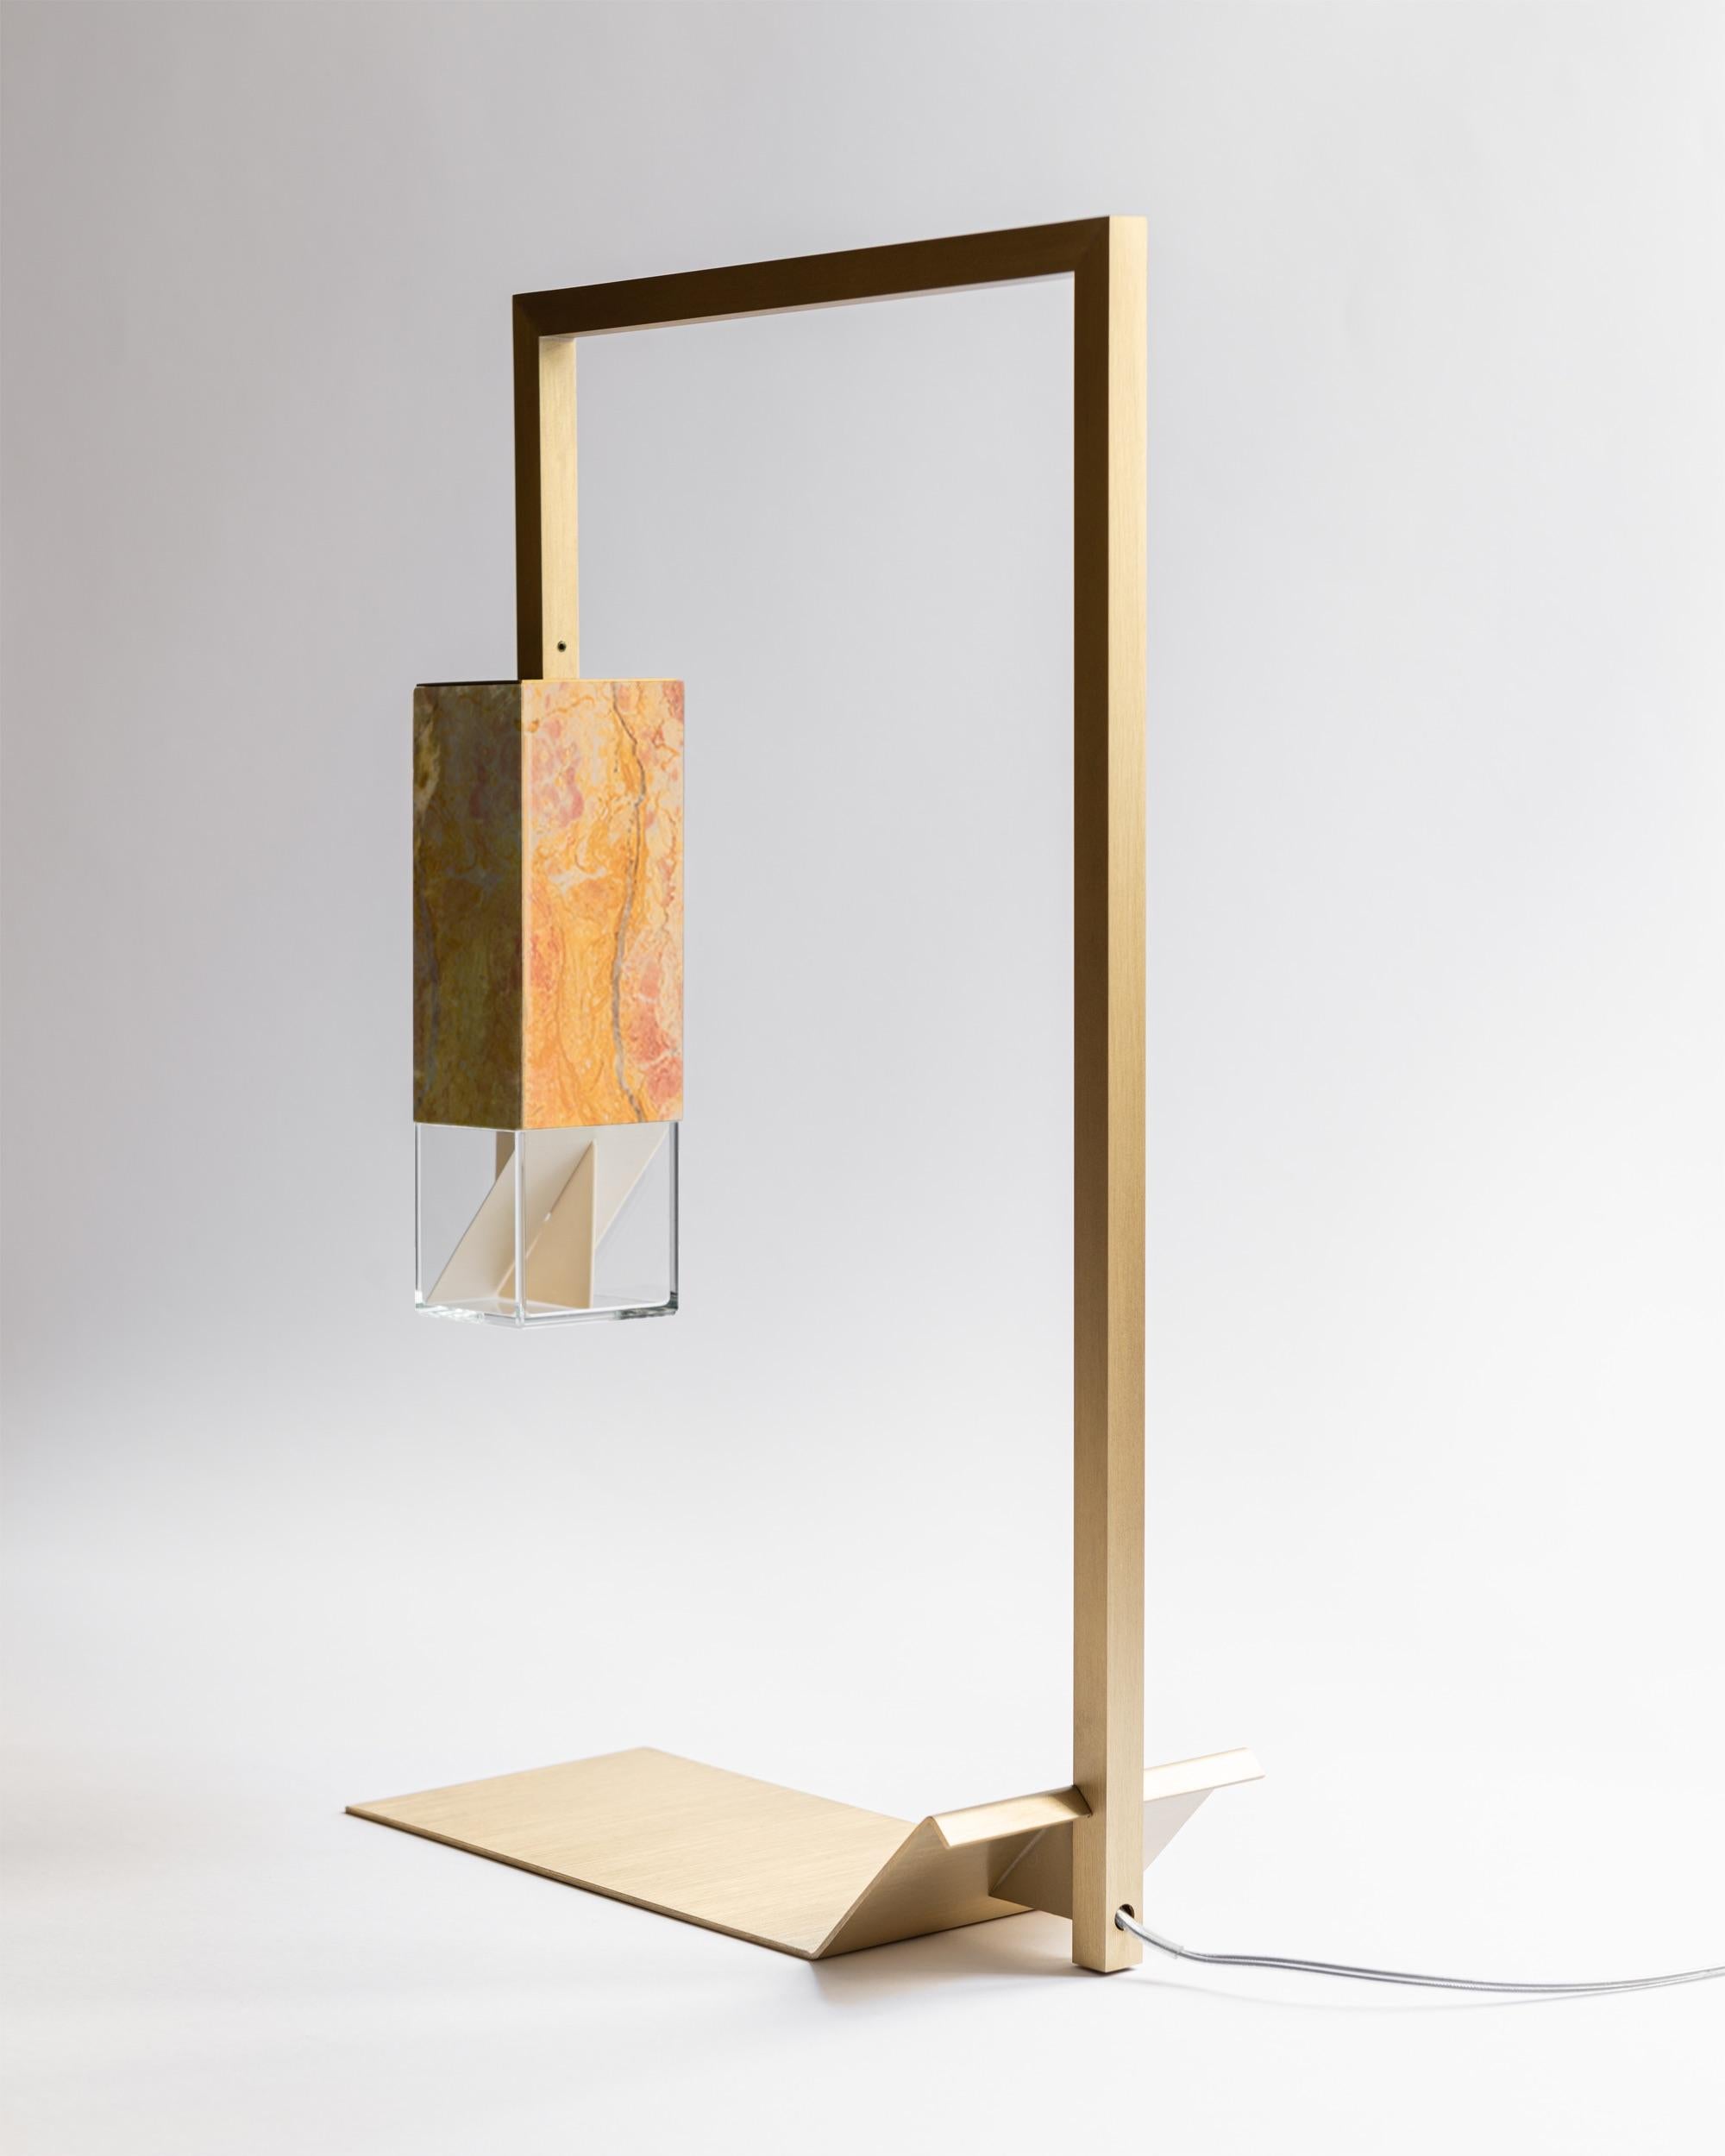 About
Contemporary Table Lamp Handmade in Yellow Marble and Brass by Formaminima

Lamp/Two Yellow Marble from Colour Edition
Design by Formaminima
Table Light
Materials:
Body lamp handcrafted in translucent marble Royal Pink Yellow / crystal glass